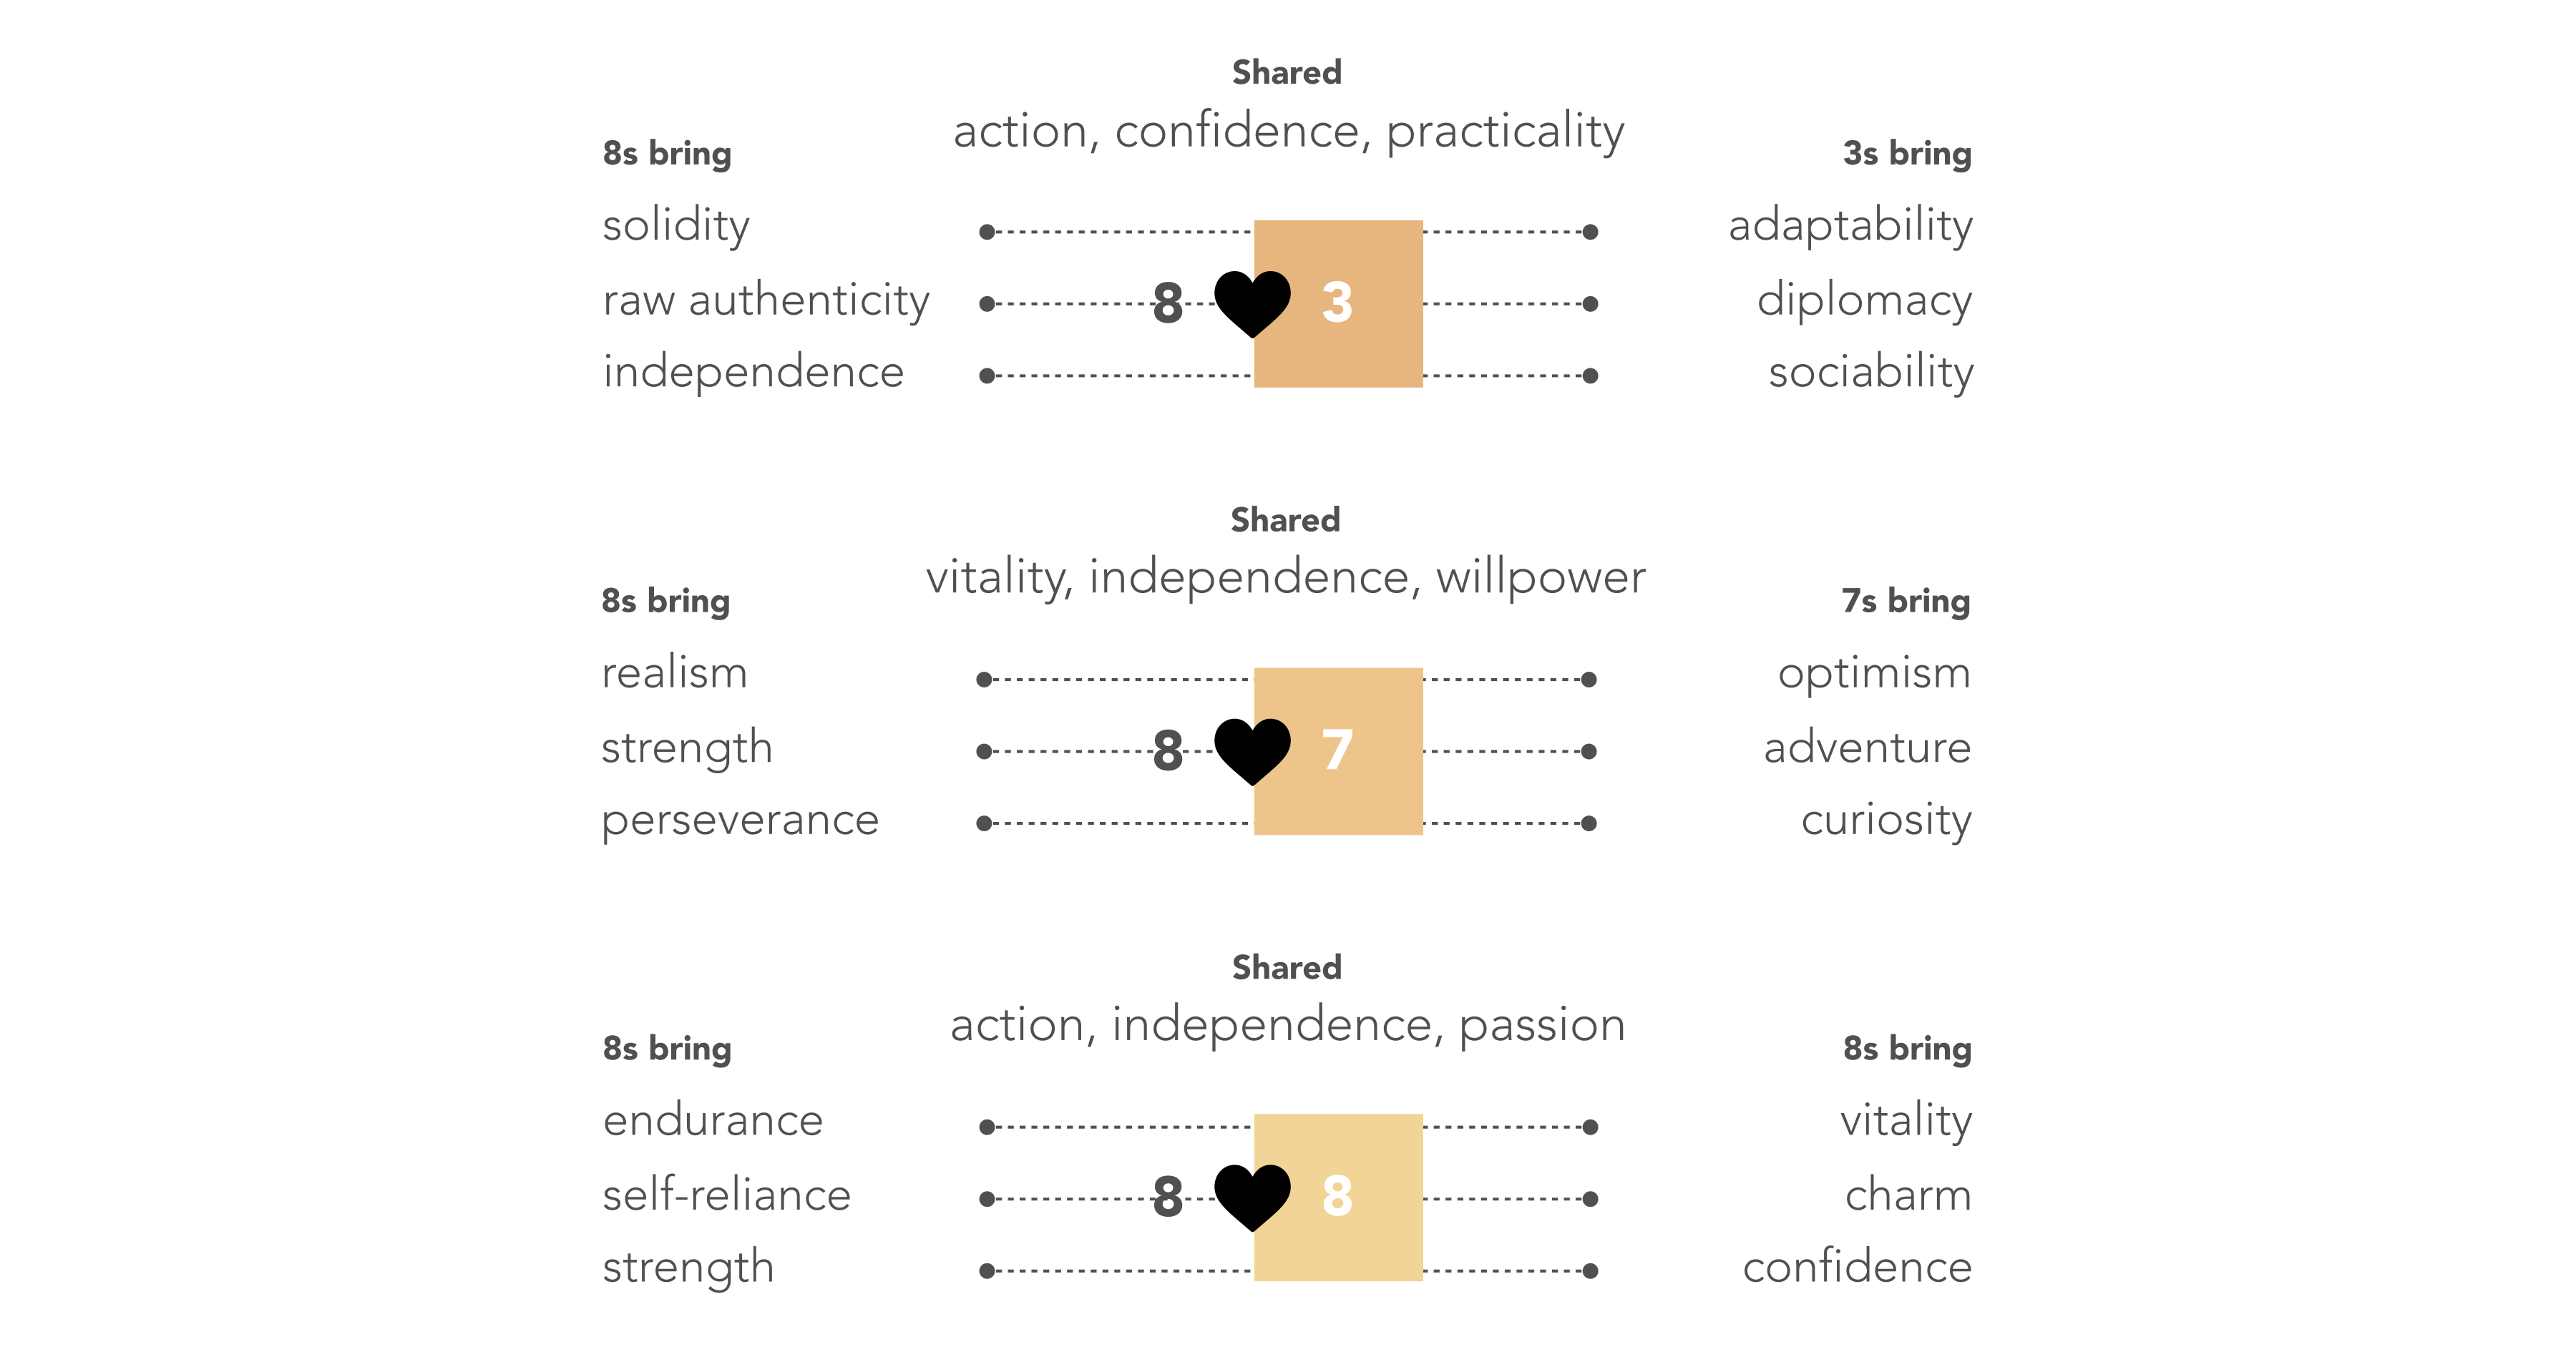 8s and 3s share action, confidence, practicality. 8s bring solidity, raw authenticity, independence, while 3s bring adaptability, diplomacy, and sociability. 8s and 7s share vitality, independence, willpower. 8s bring realism, strength, perseverance, while 7s bring optimism, adventure, curiosity. 8s and 8s share action, independence, passion. 8s bring endurance, self-reliance, strength, while other 8s bring vitality, charm, confidence.